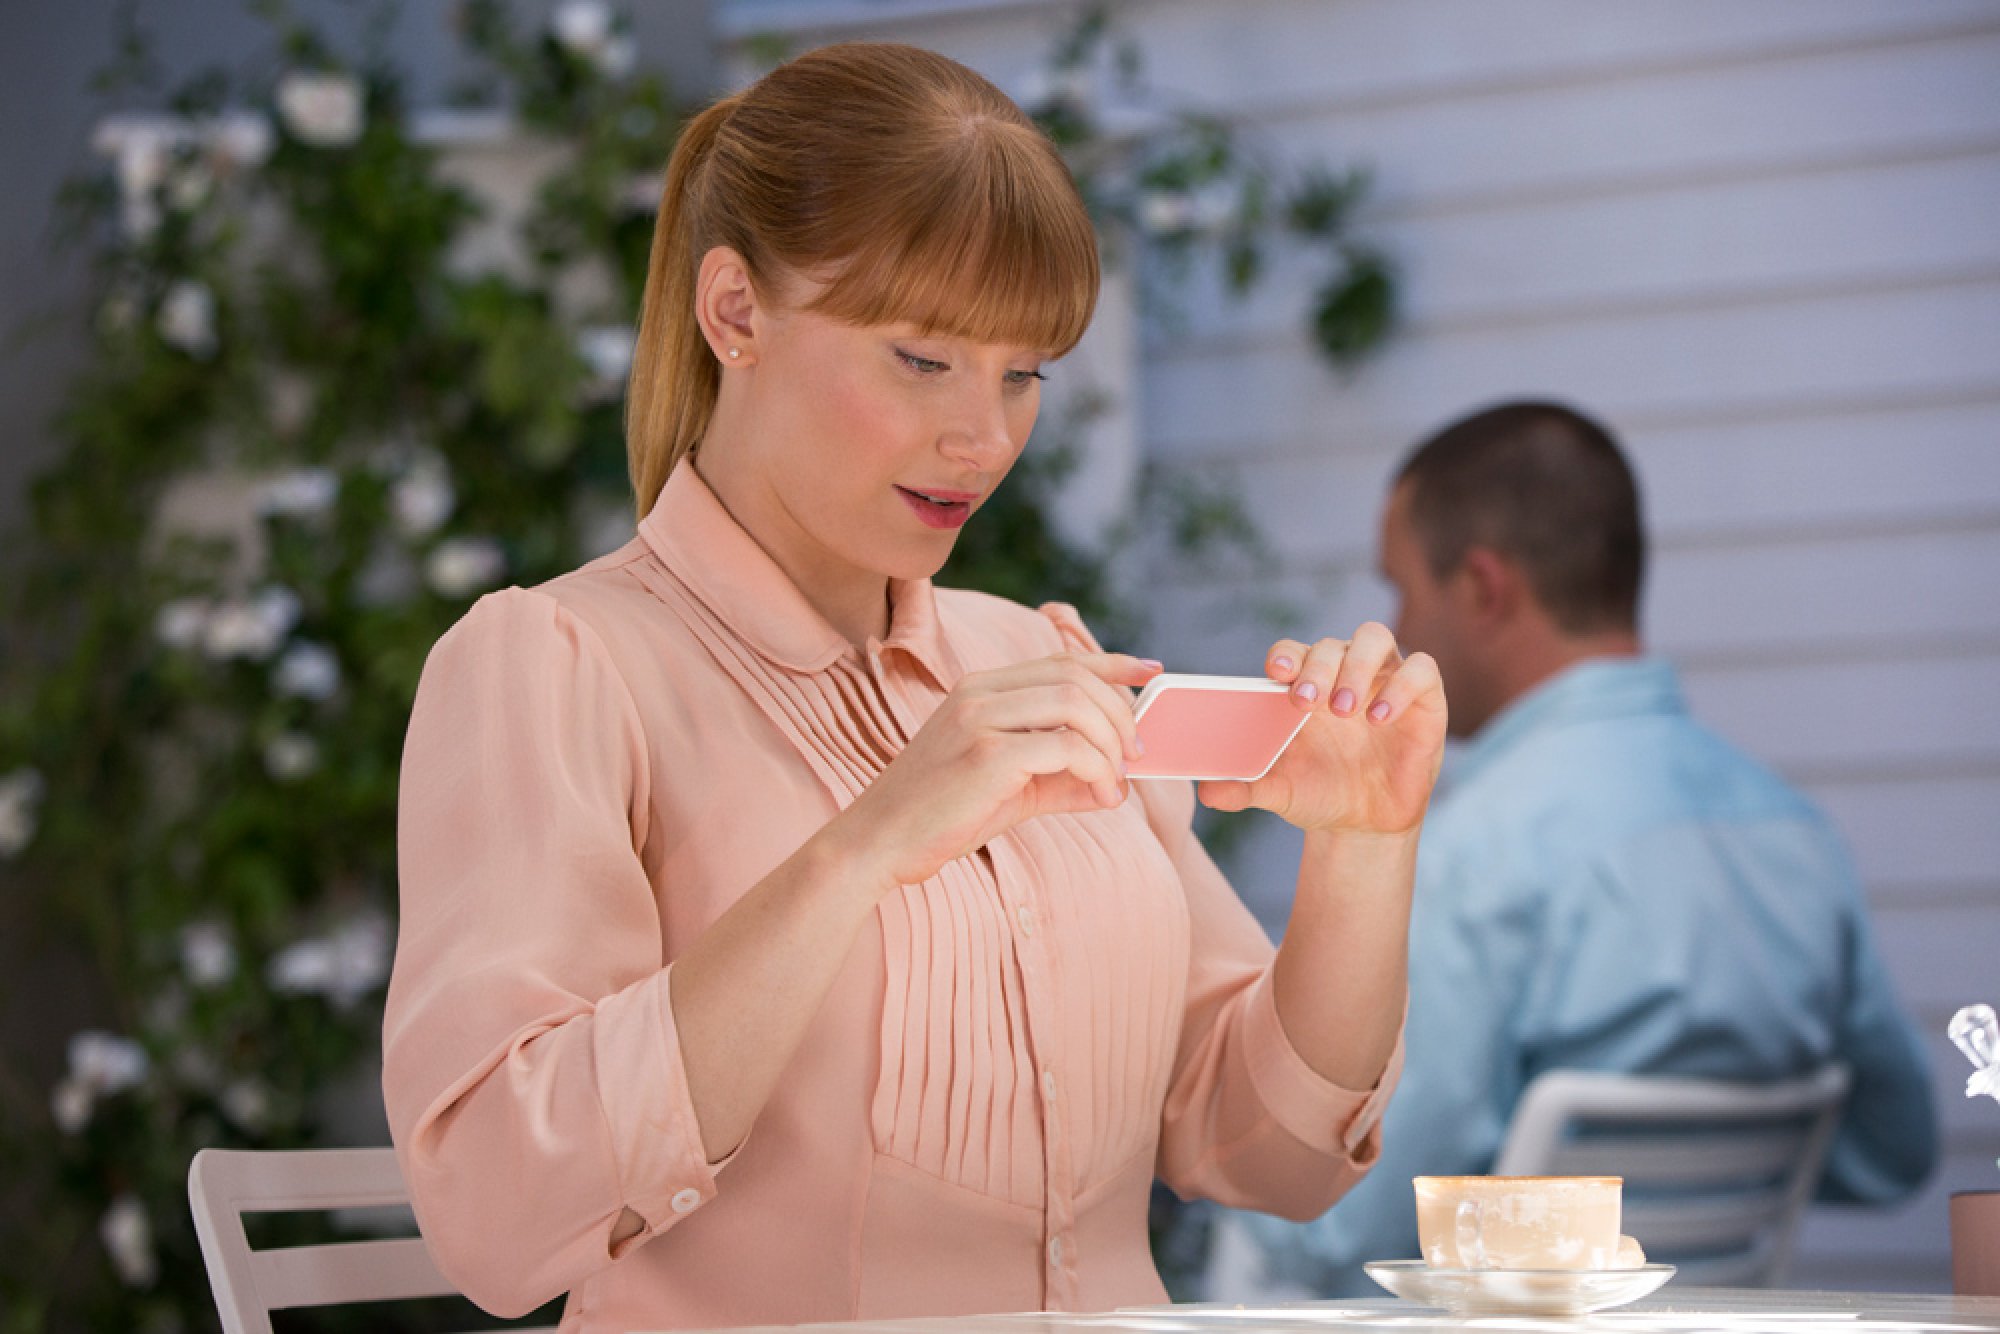 Bryce Dallas Howard as Lacie in "Black Mirror" episode "Nosedive." She is taking a photograph of her drink at a cafe.